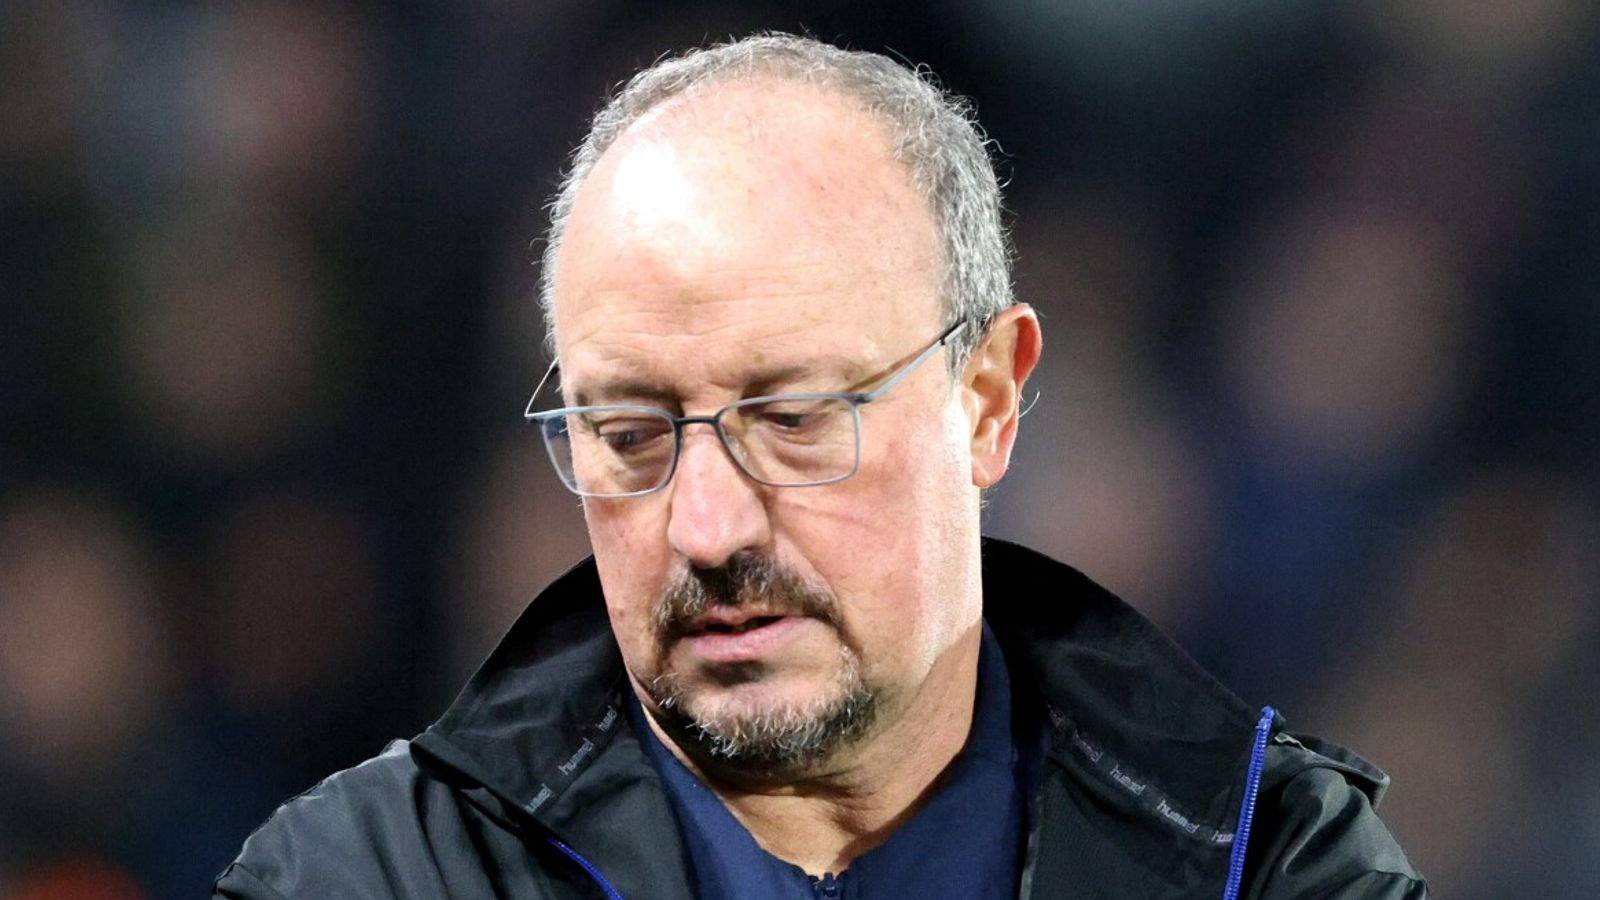 Rafael Benitez: Everton board meeting to discuss manager's future after defeat to Norwich